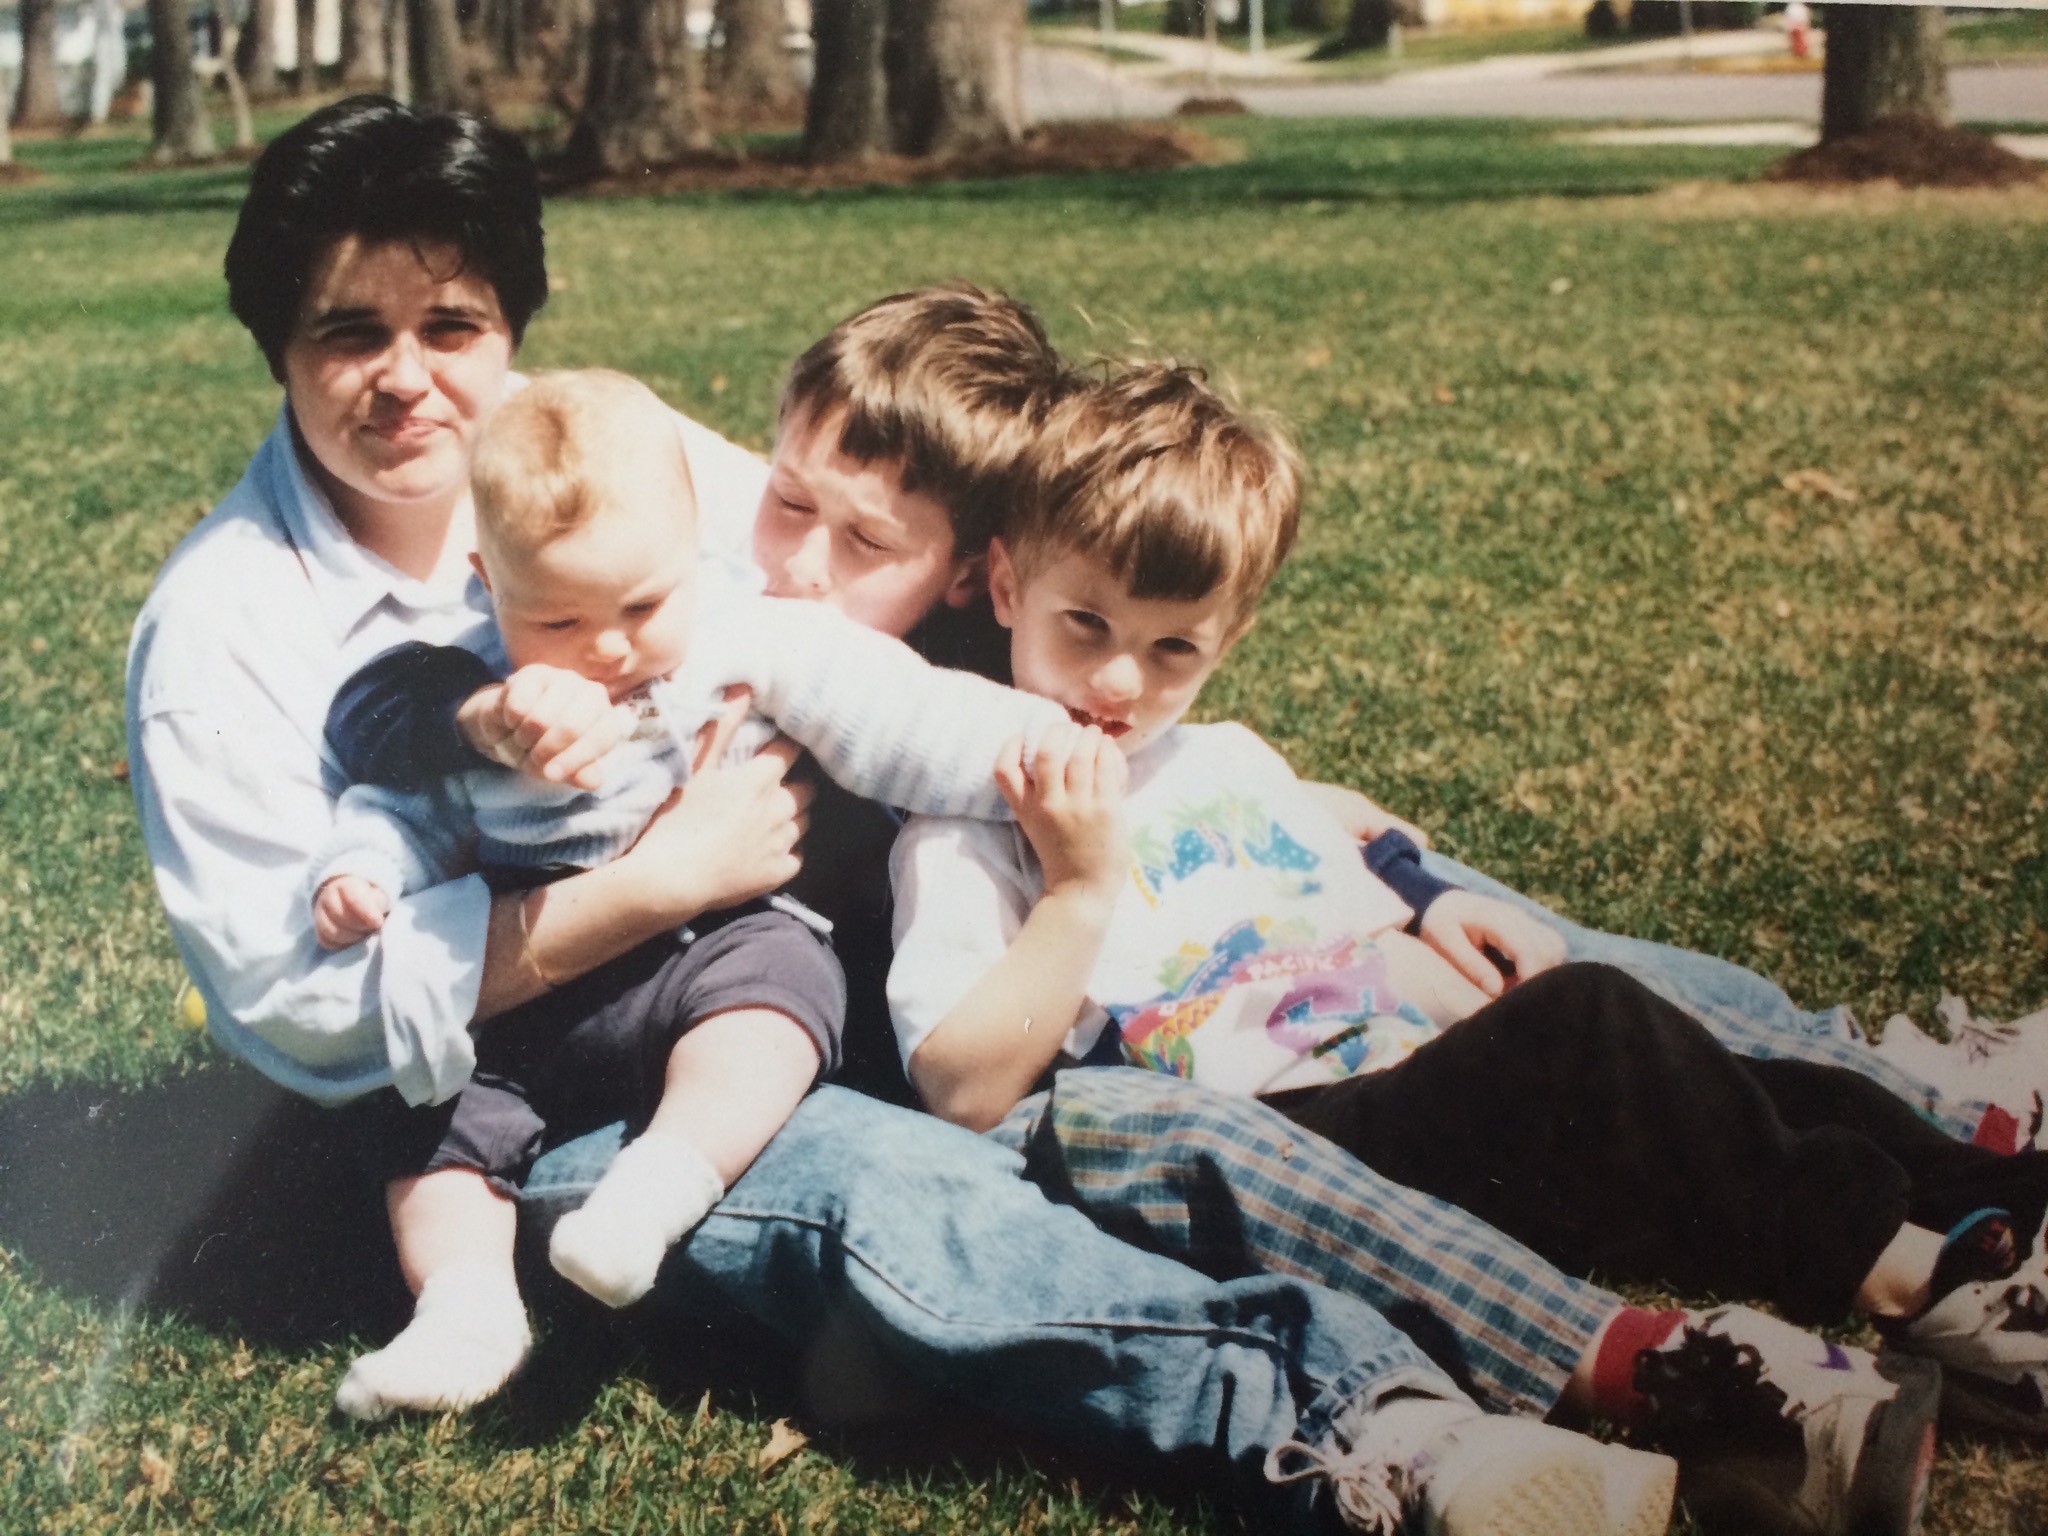 Clare and her three boys 25 years ago. How time flies!